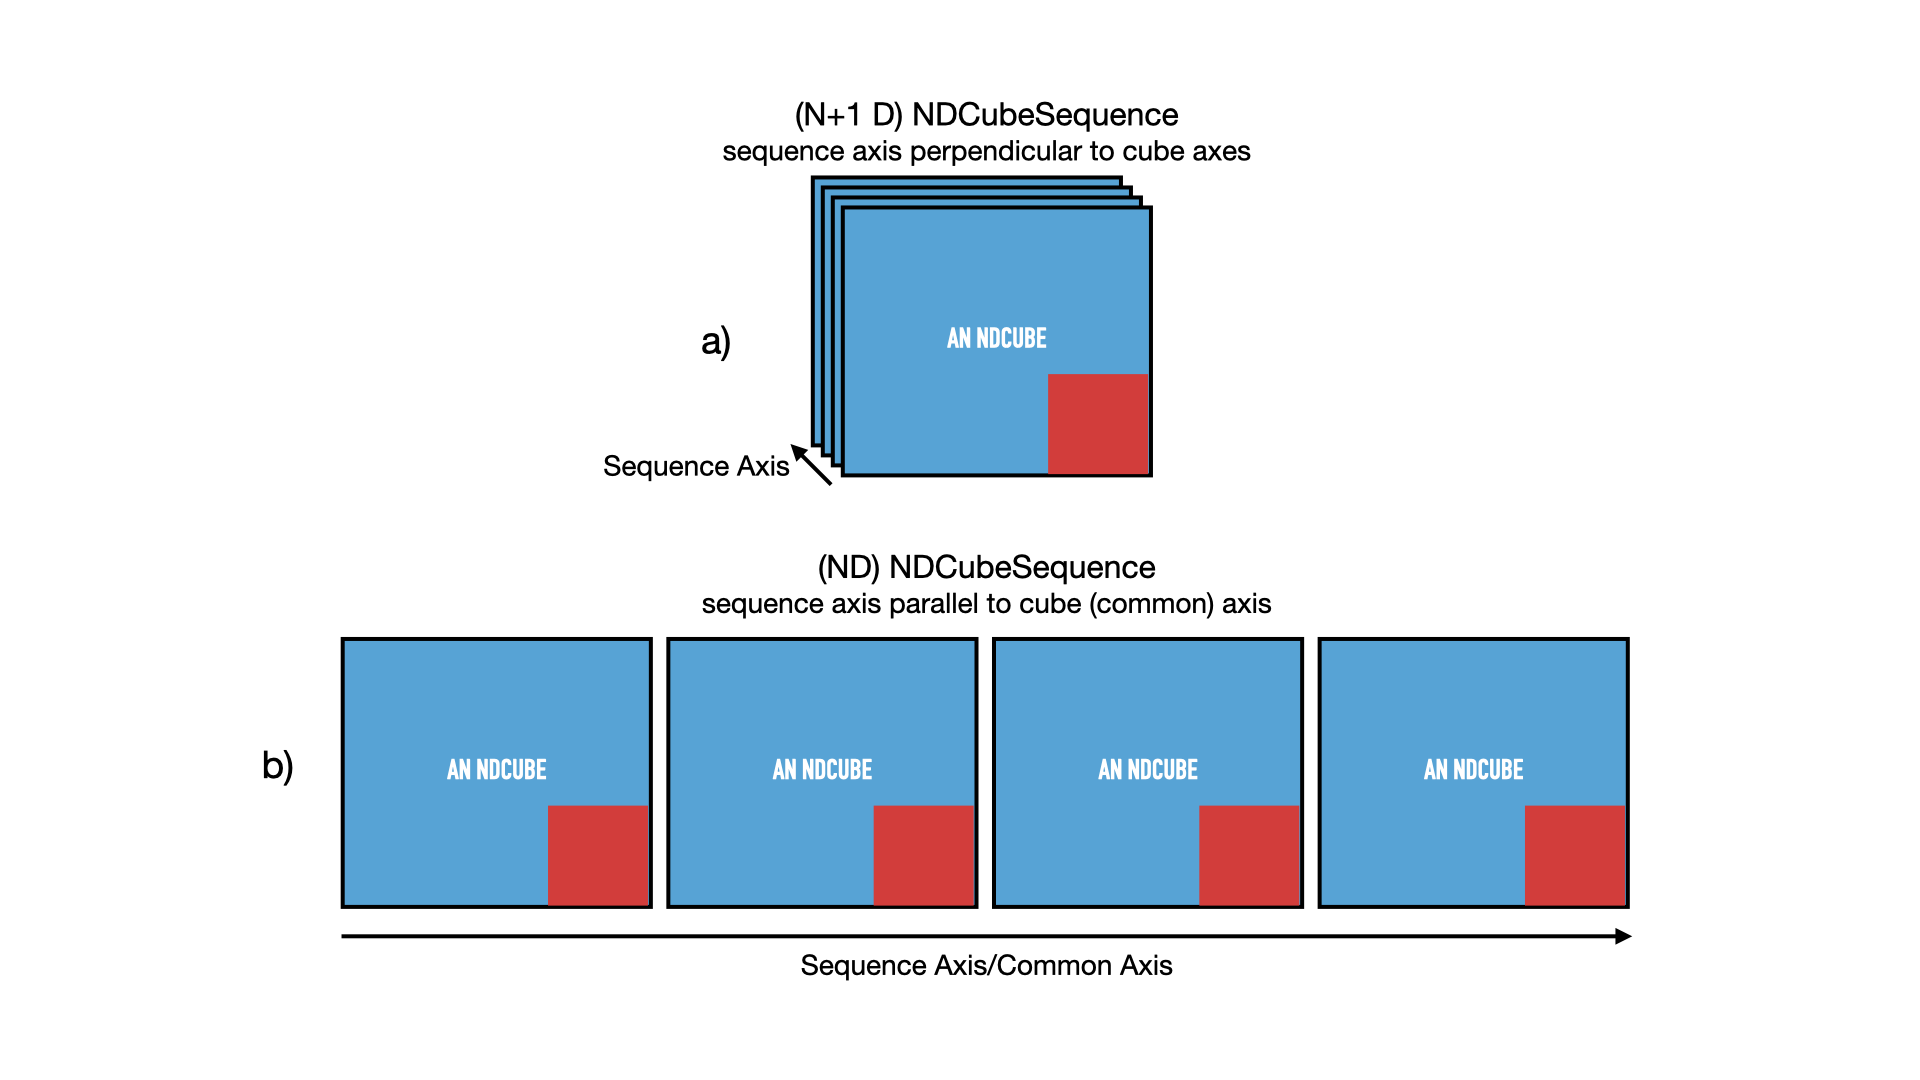 Schematic of an NDCubeSequence and its two configurations.